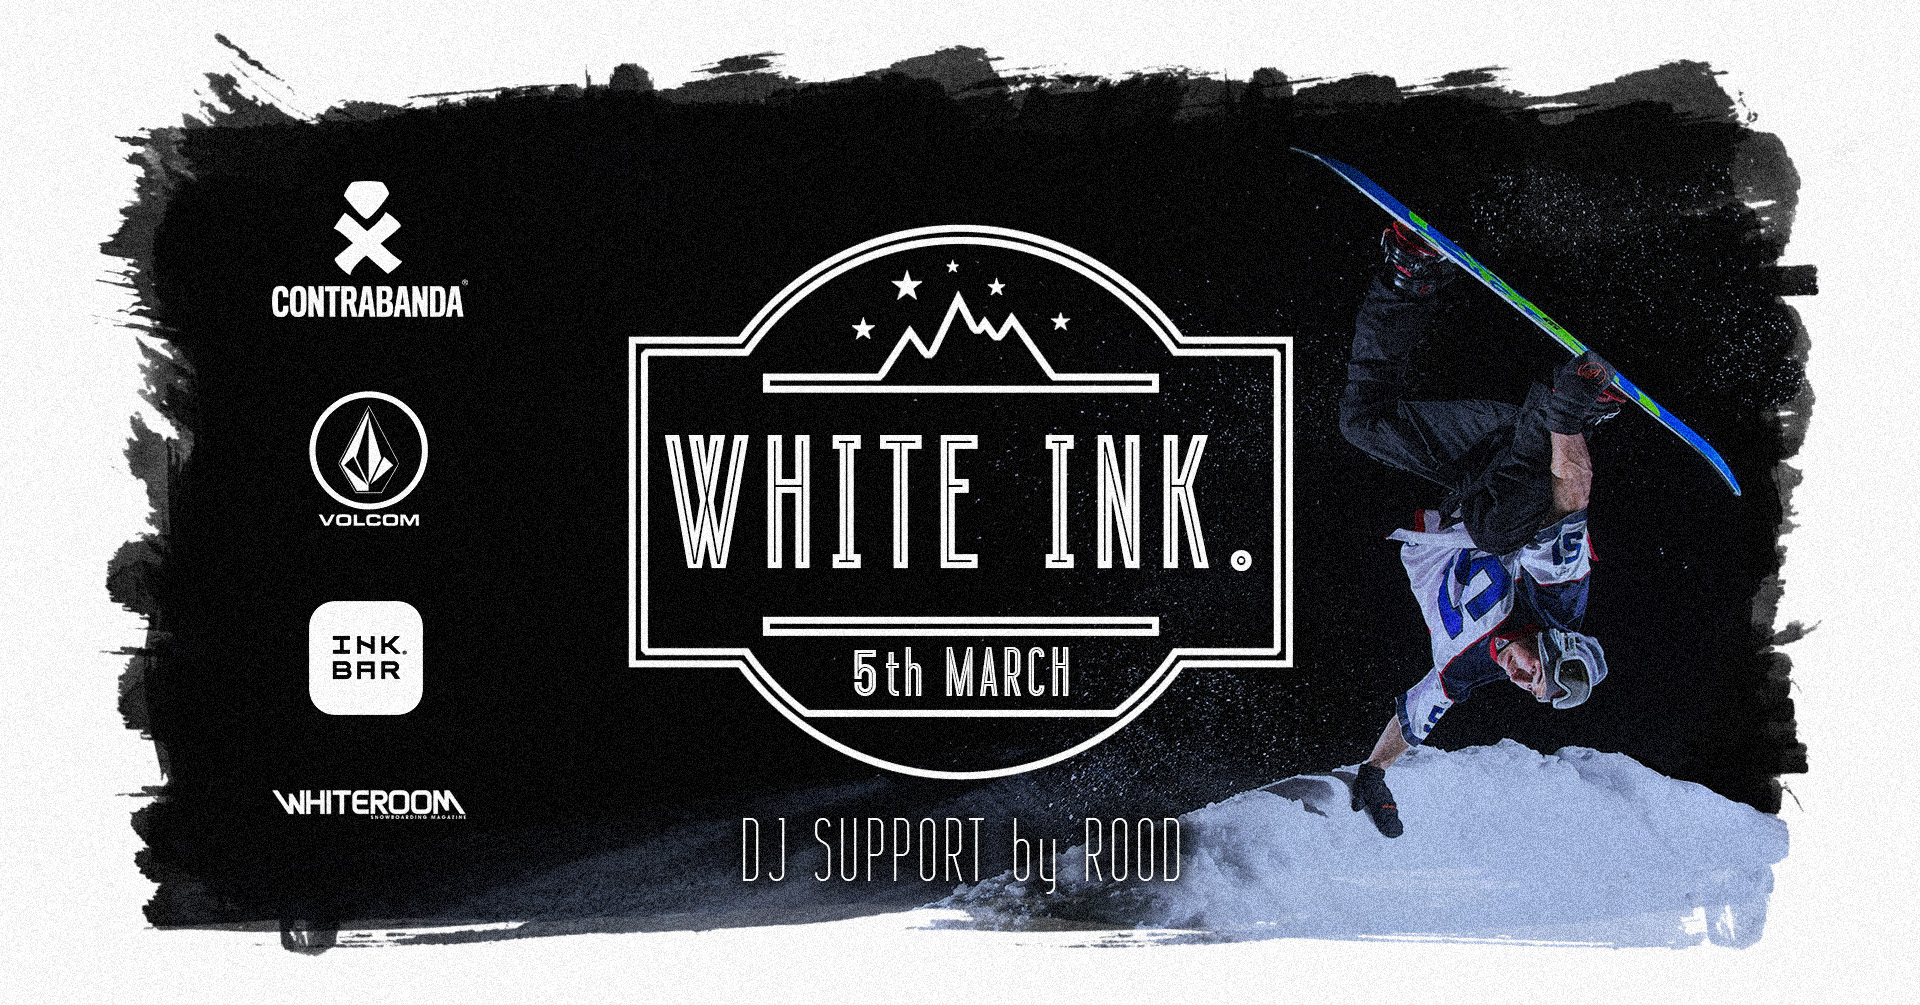 White Ink Party feat. Contrabanda & Volcom